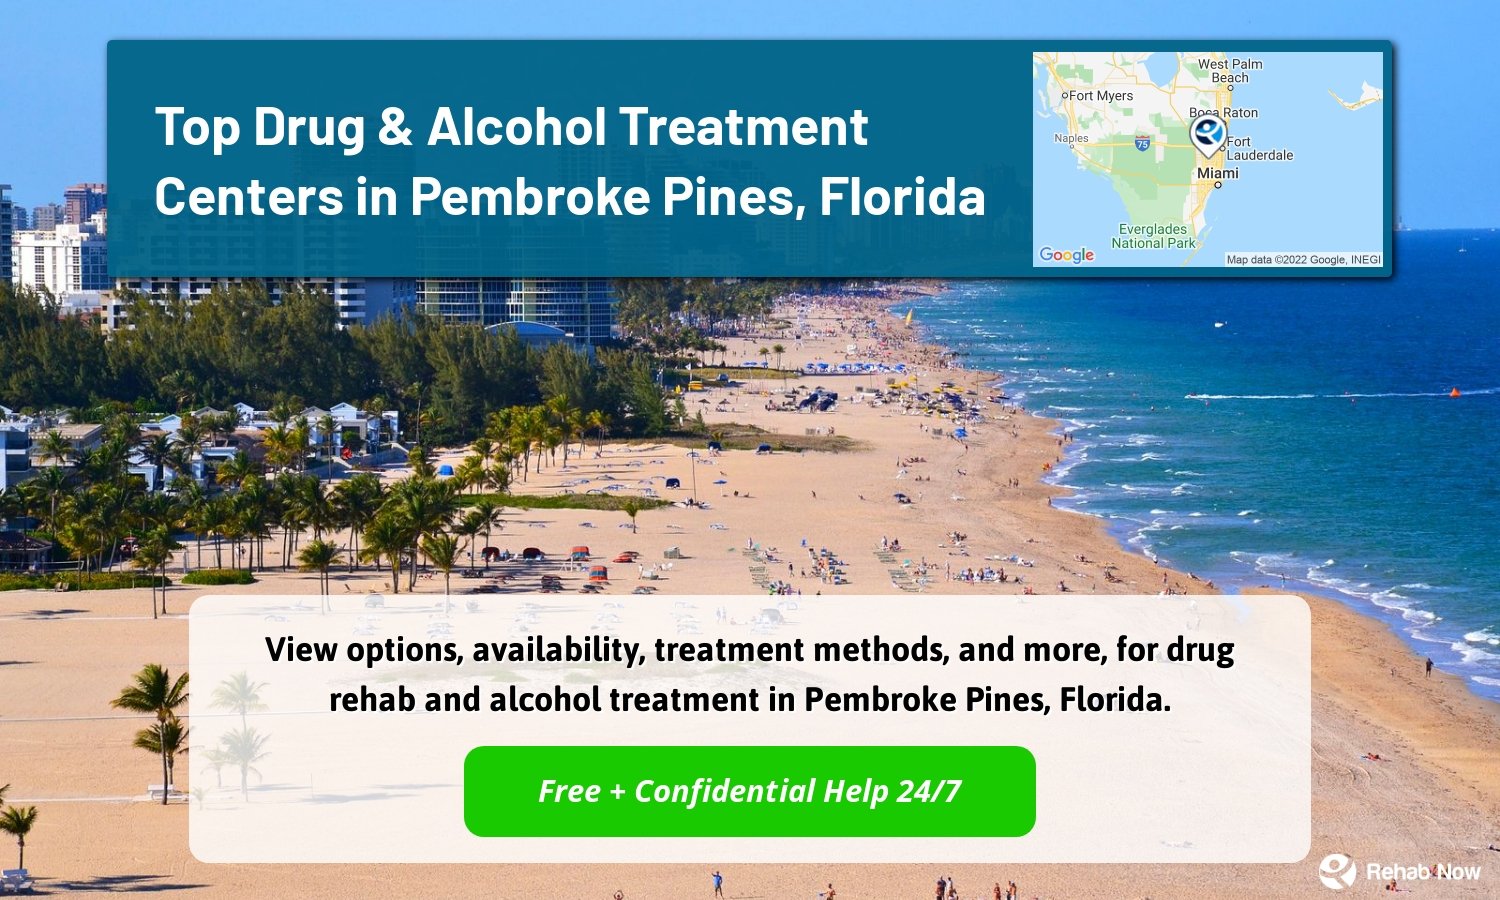 View options, availability, treatment methods, and more, for drug rehab and alcohol treatment in Pembroke Pines, Florida.